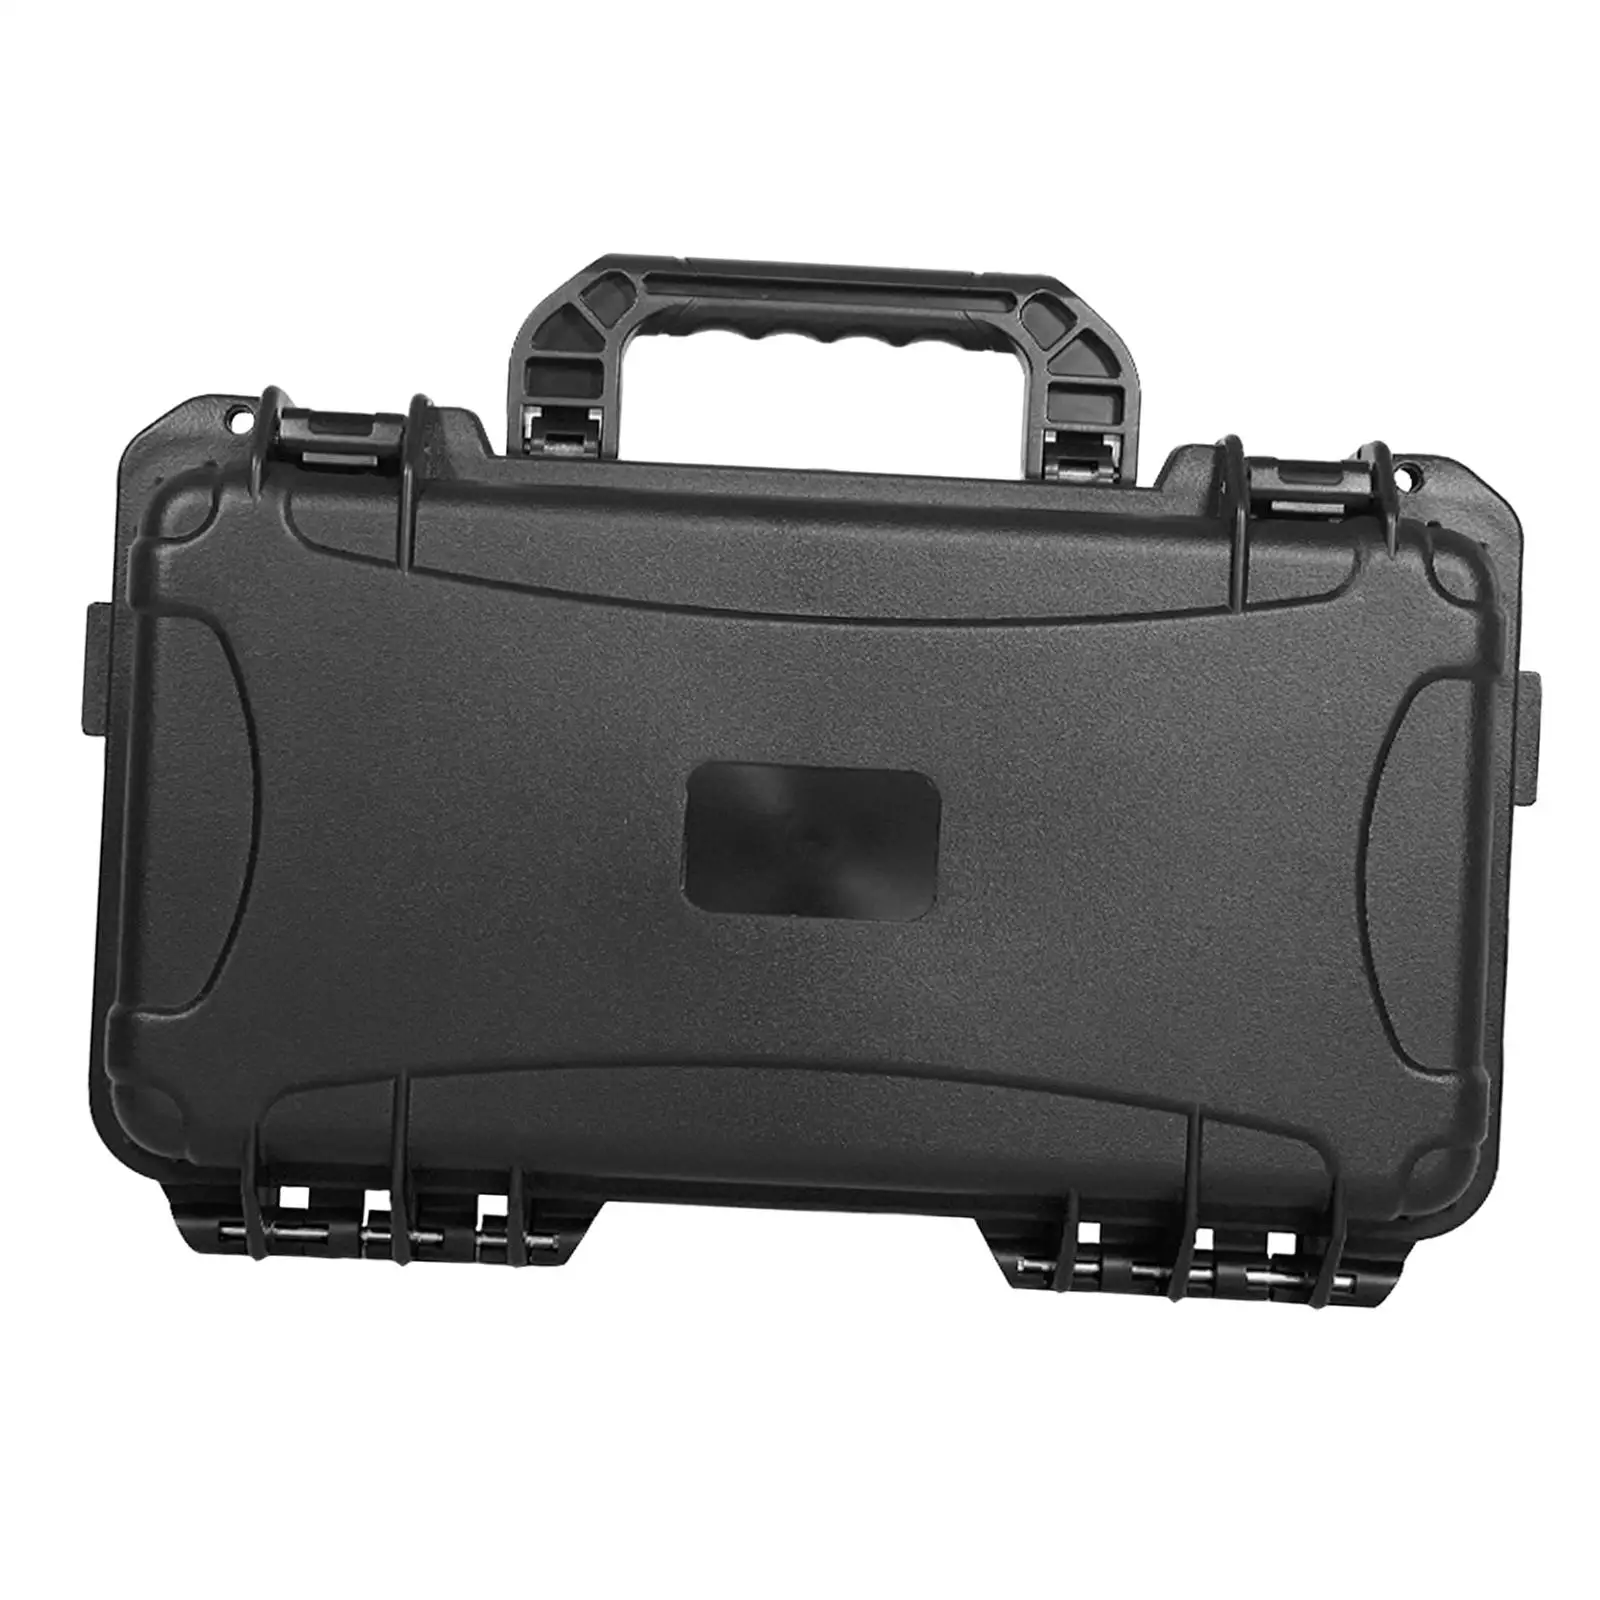 Shockproof Outdoor Storage Case carry tools Case Waterproof for Electronics Transportation